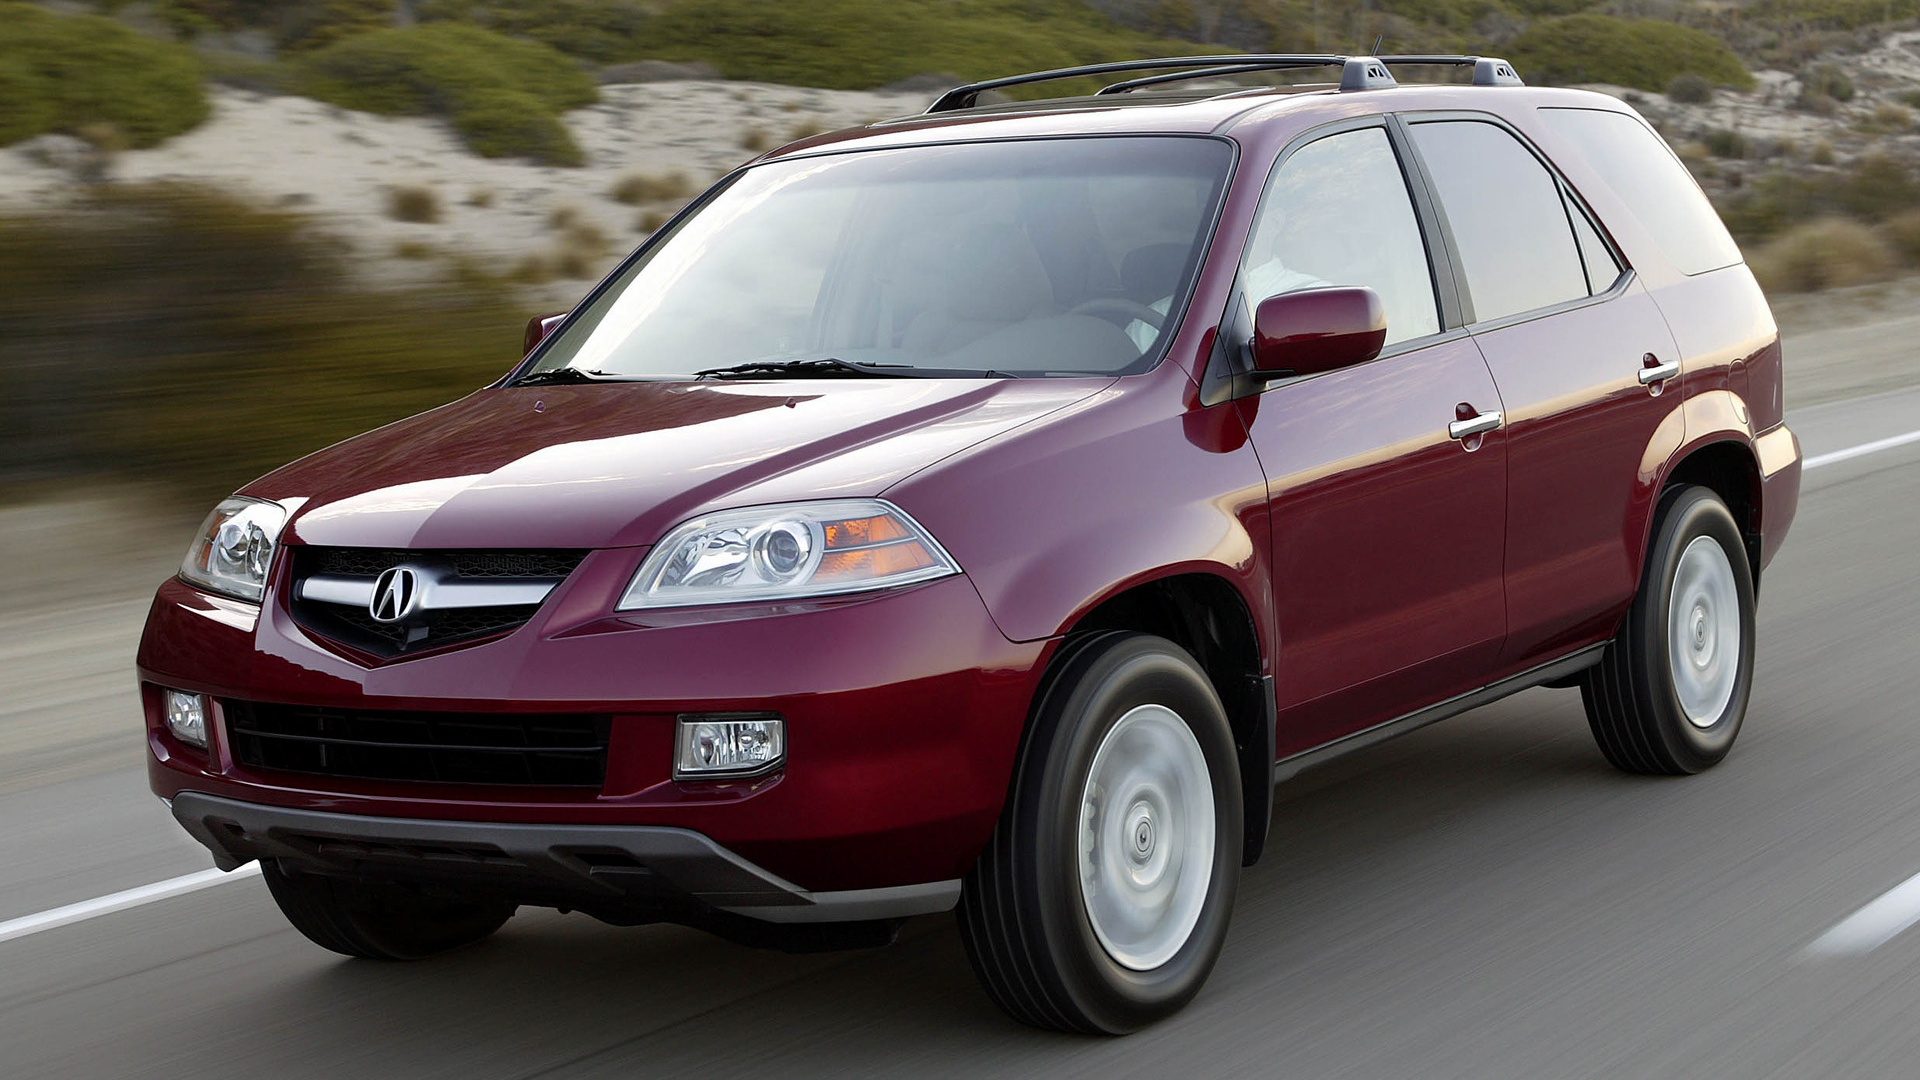 2004 Acura Mdx Wallpapers And Hd Images Car Pixel